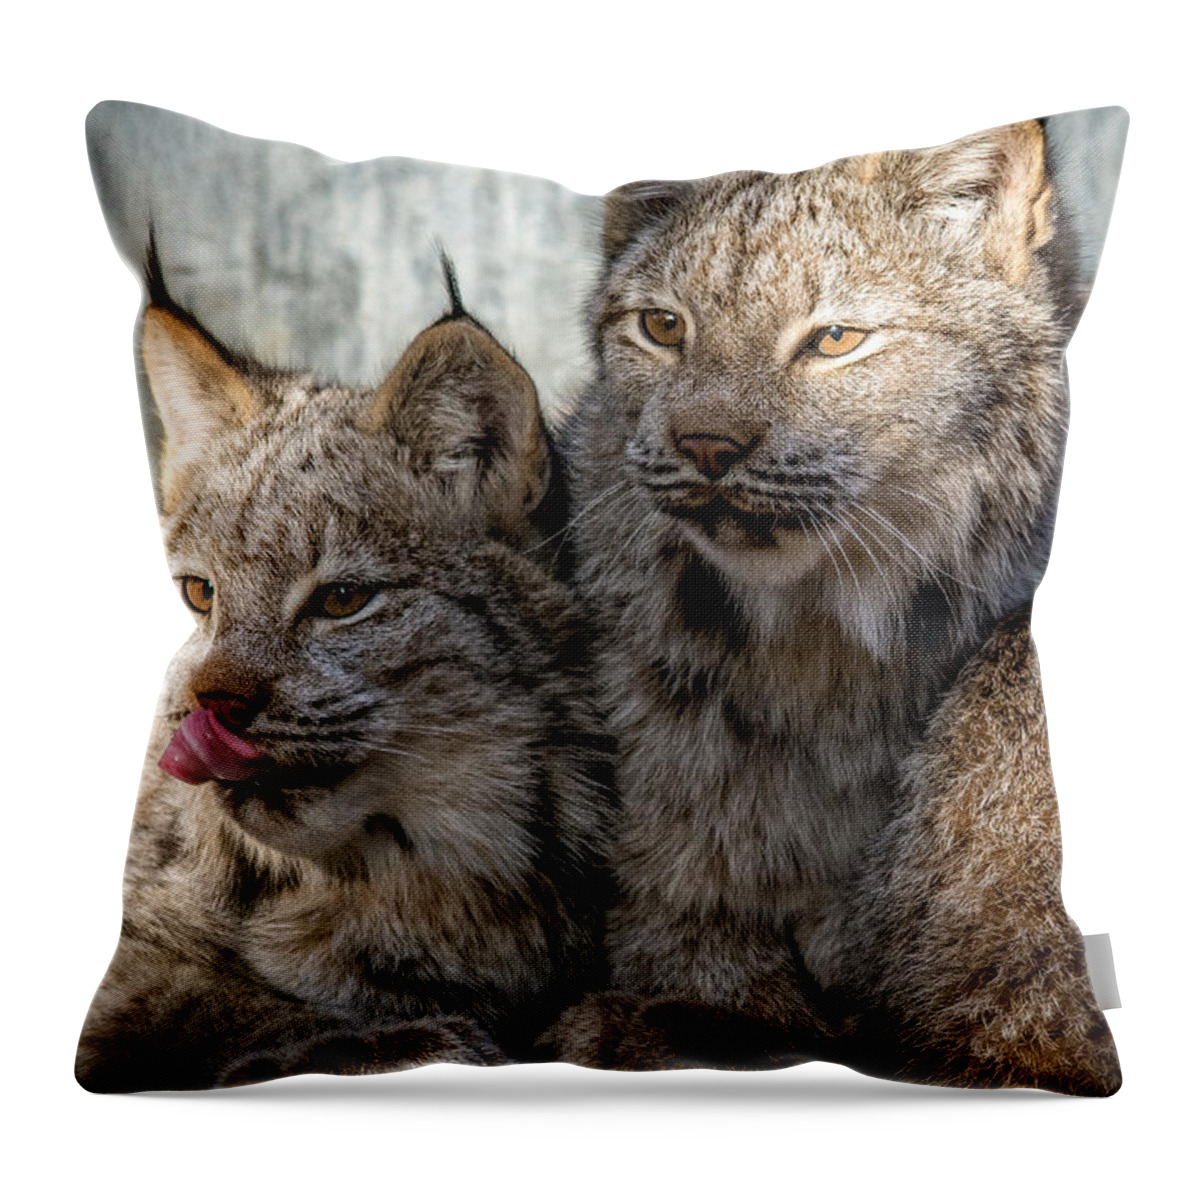 Lynx Throw Pillow featuring the photograph Canada Lynx by Michael Hubley